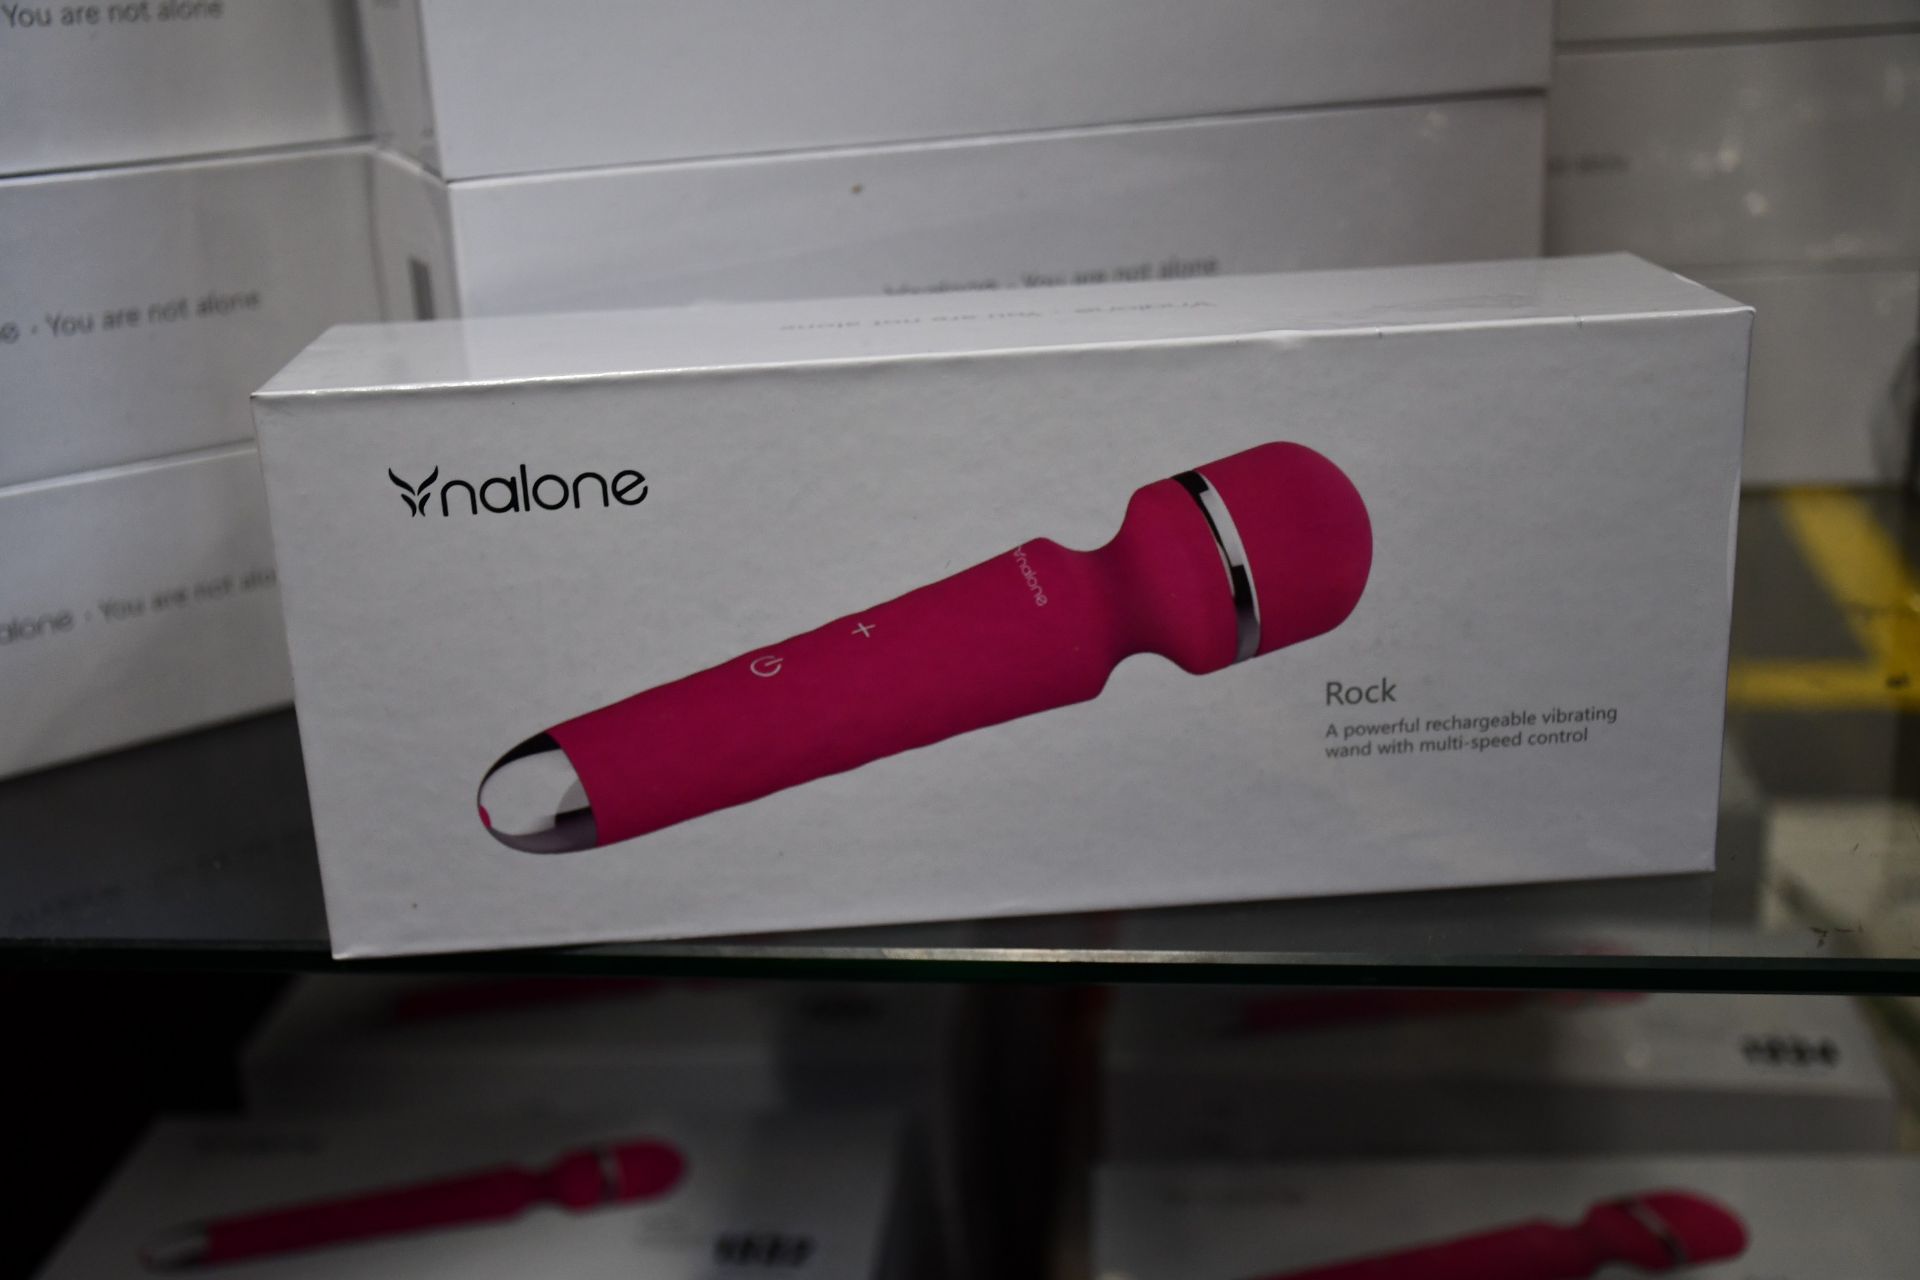 Four boxed as new Nalone Rock Wall Massagers in pink (A powerful rechargeable vibrating wand with